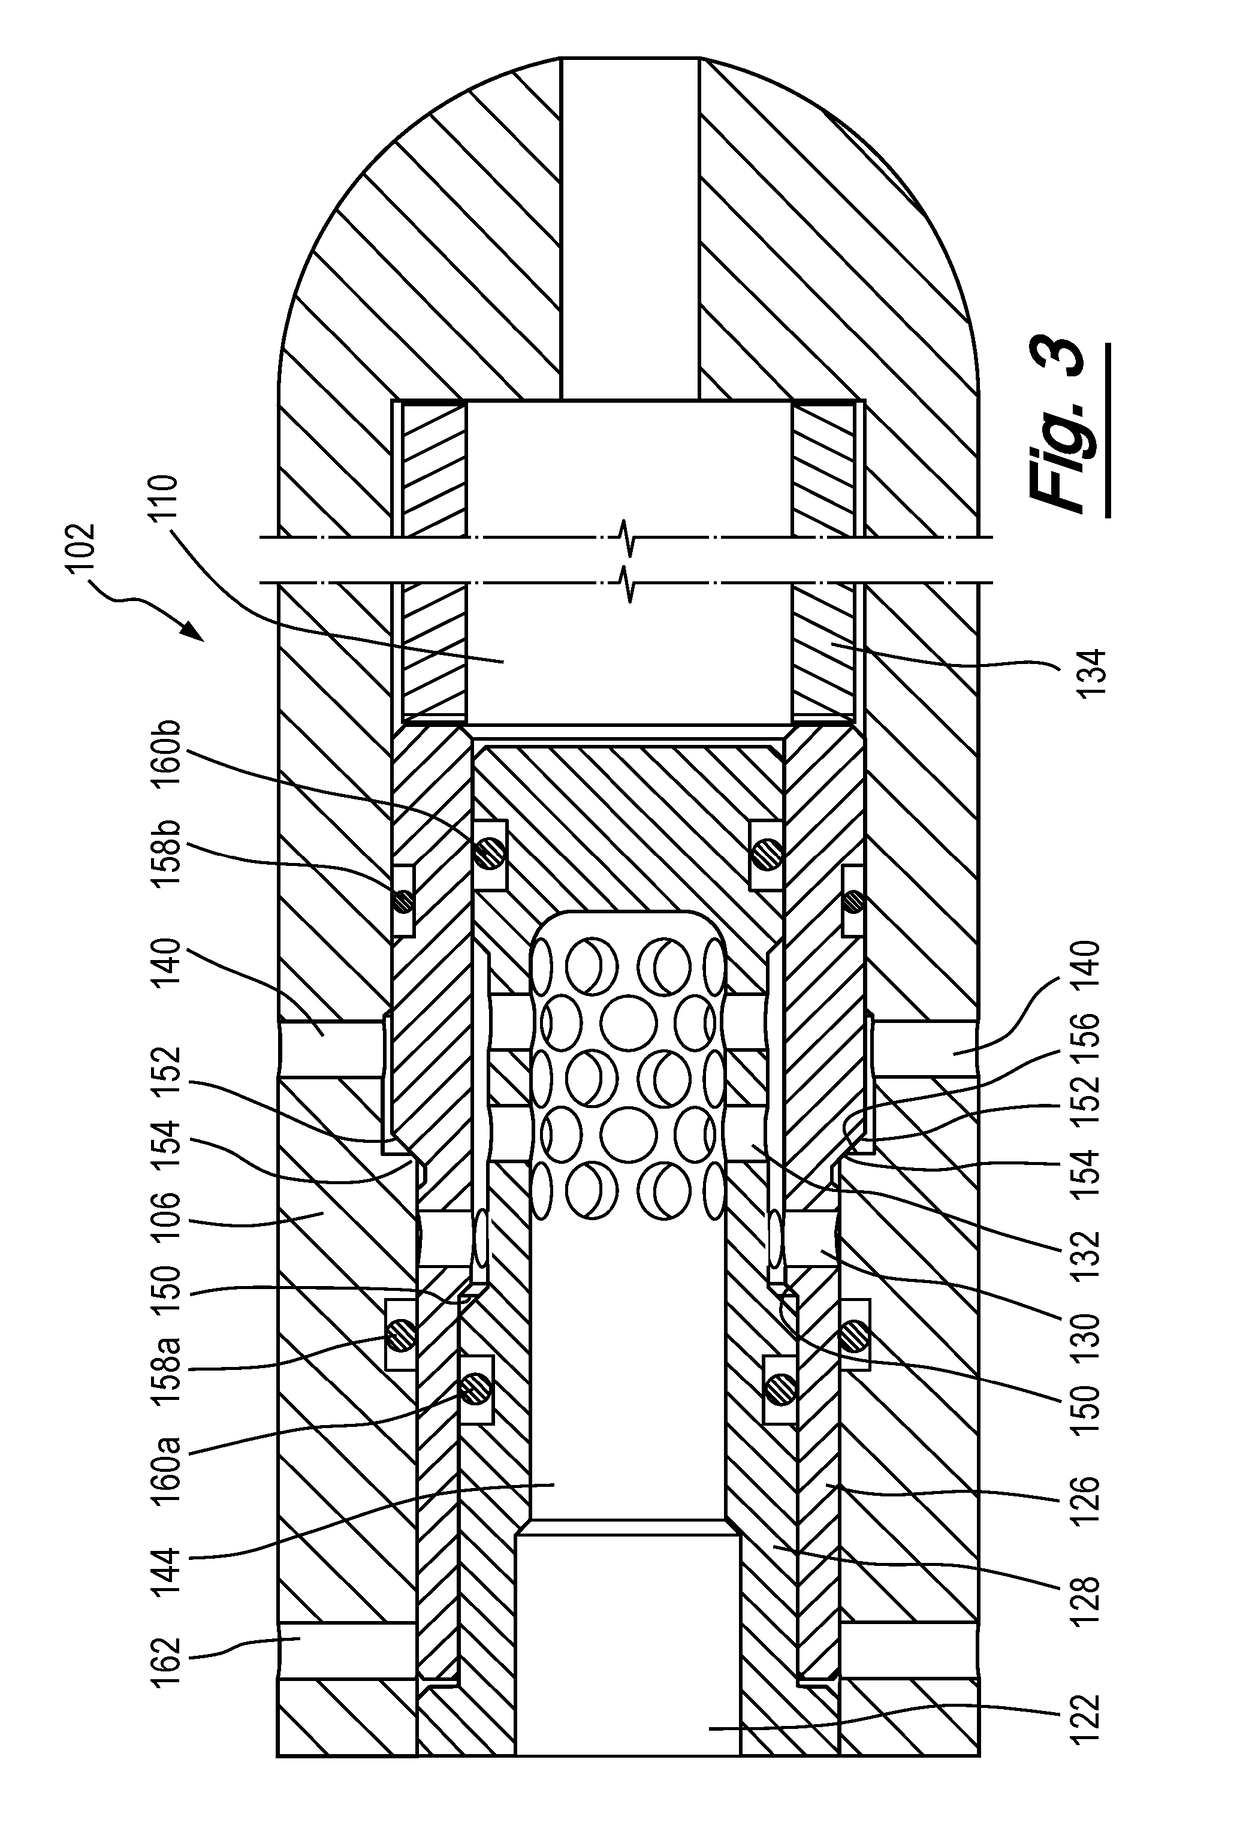 Fluid Discharge Apparatus and Method of Use